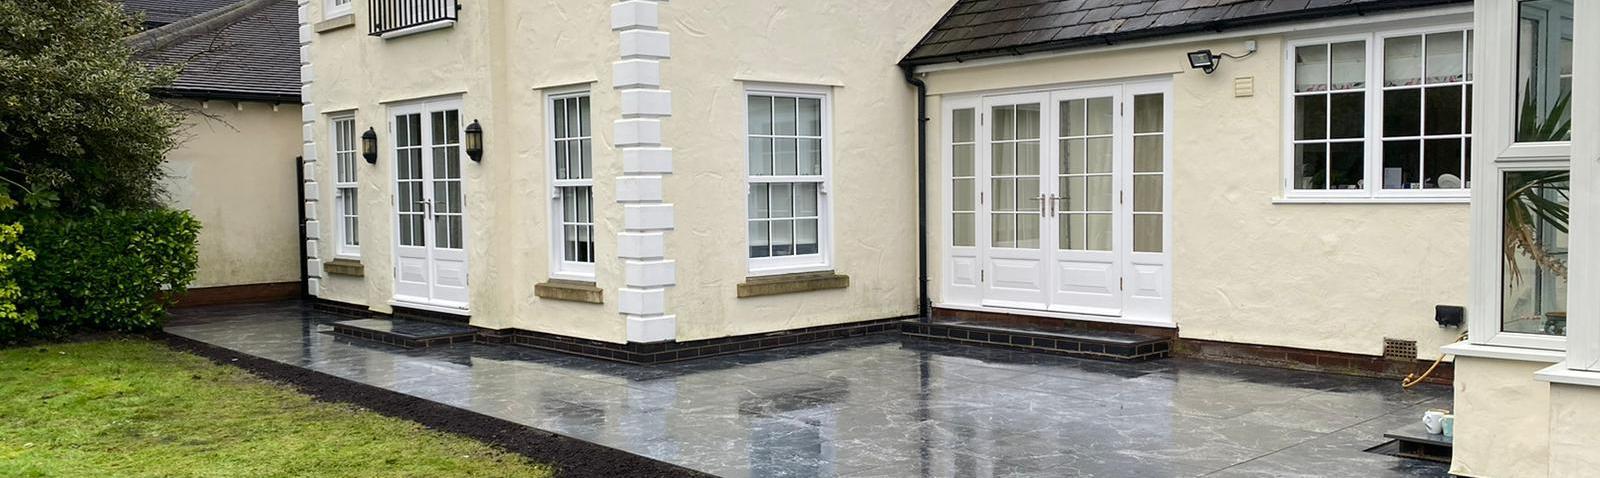 Pavetar Construction Ltd - Driveway specialists Leicester